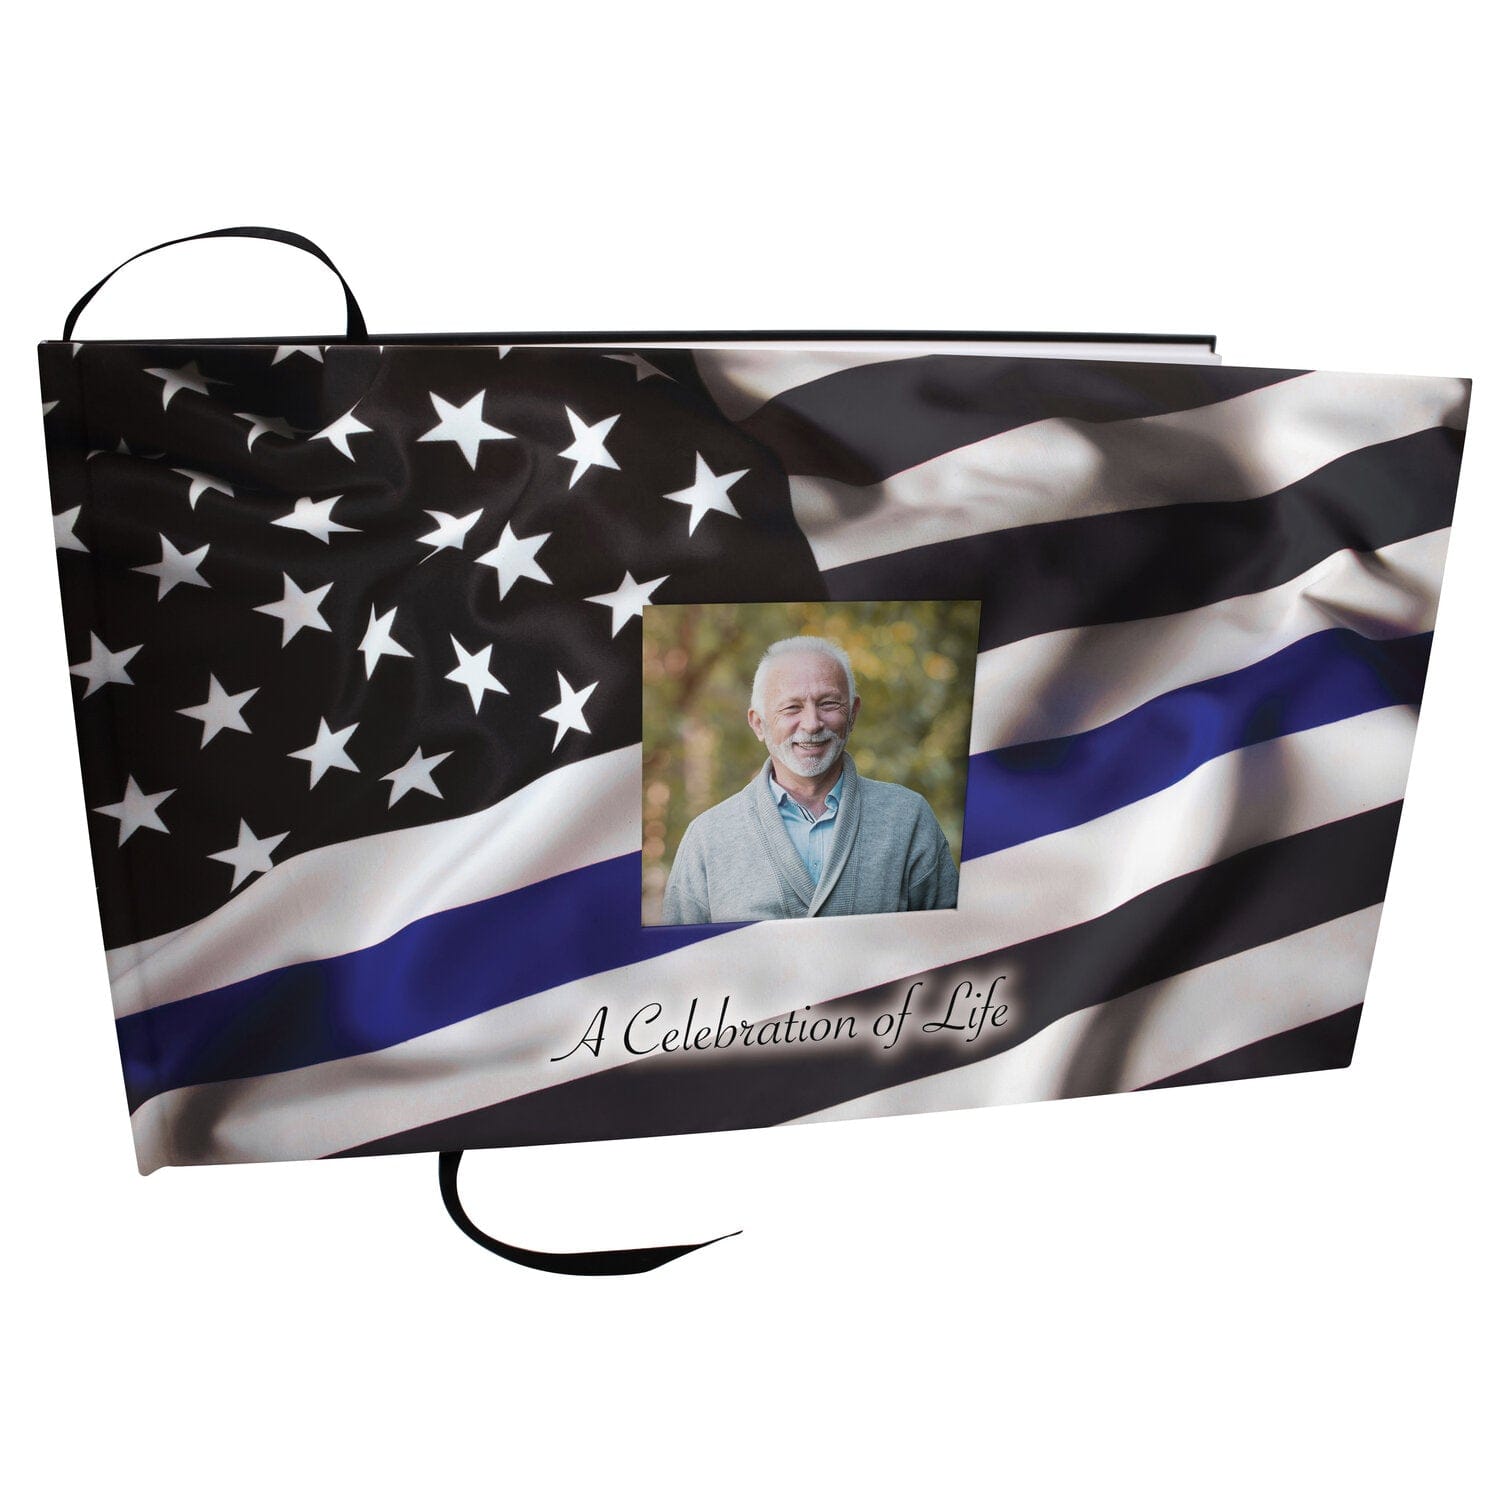 Commemorative Cremation Urns Blue Line Flag Police & Law Enforcement Matching Themed 'Celebration of Life' Guest Book for Funeral or Memorial Service